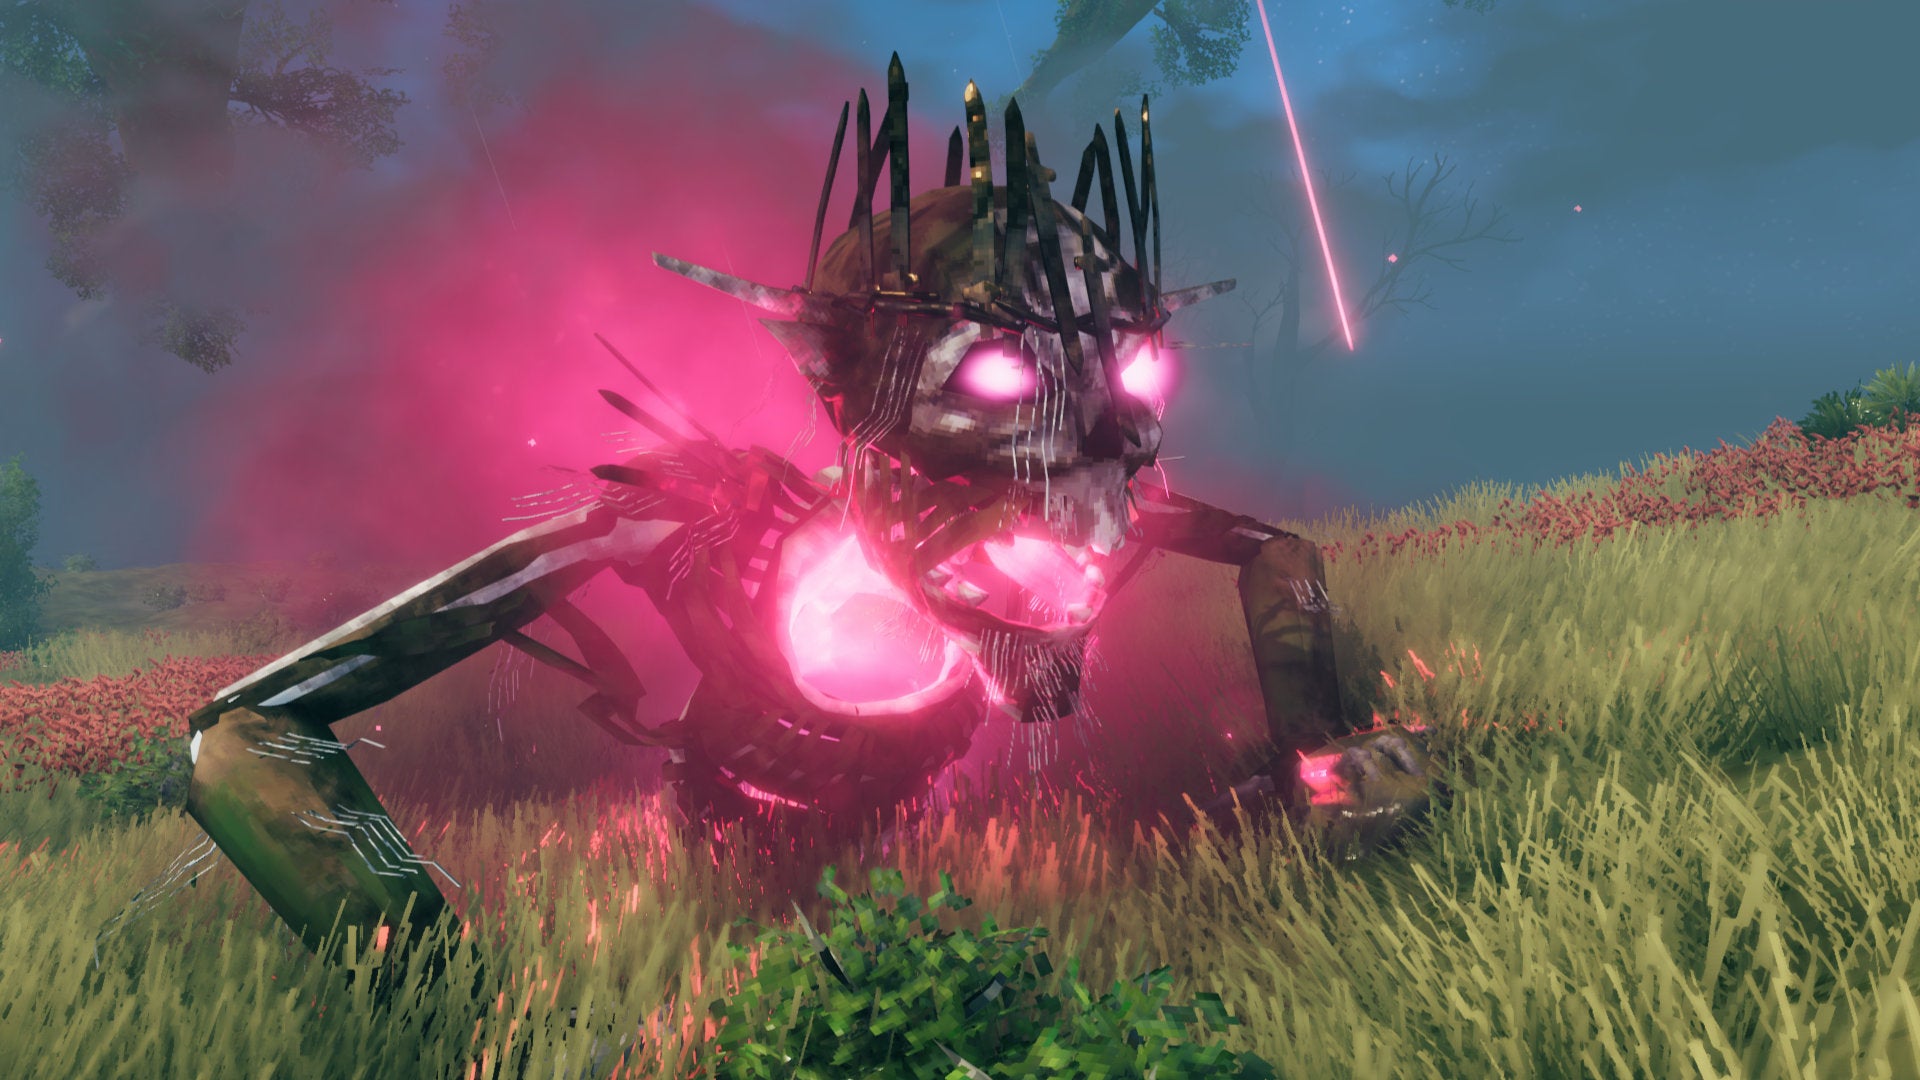 A Valheim screenshot of Yagluth, the fifth and final boss, rising from the ground in a Plains biome.